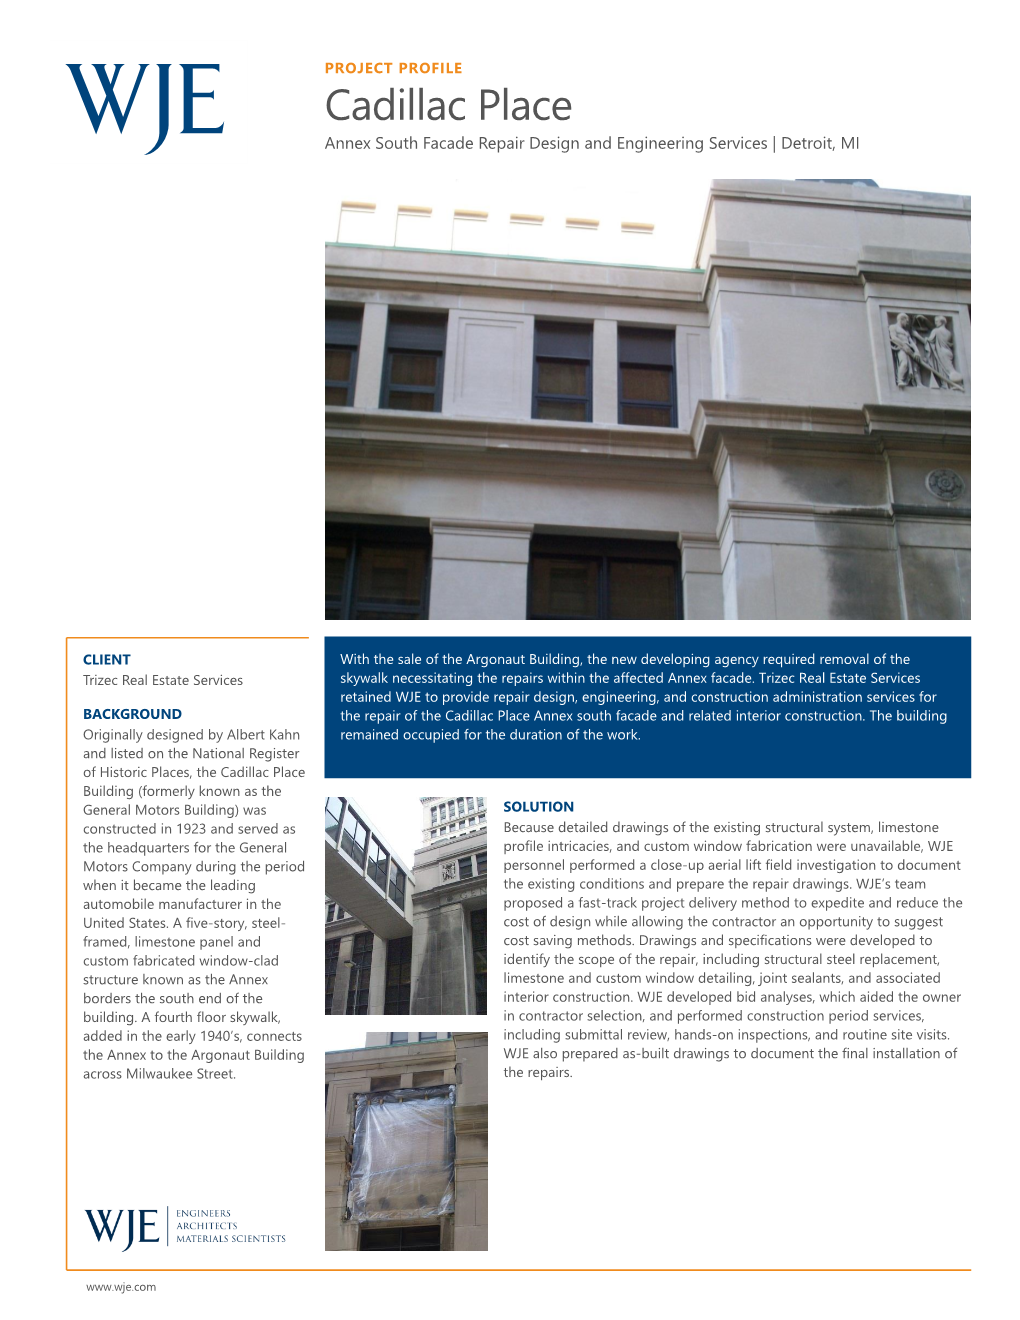 Cadillac Place WJE Annex South Facade Repair Design and Engineering Services | Detroit, MI